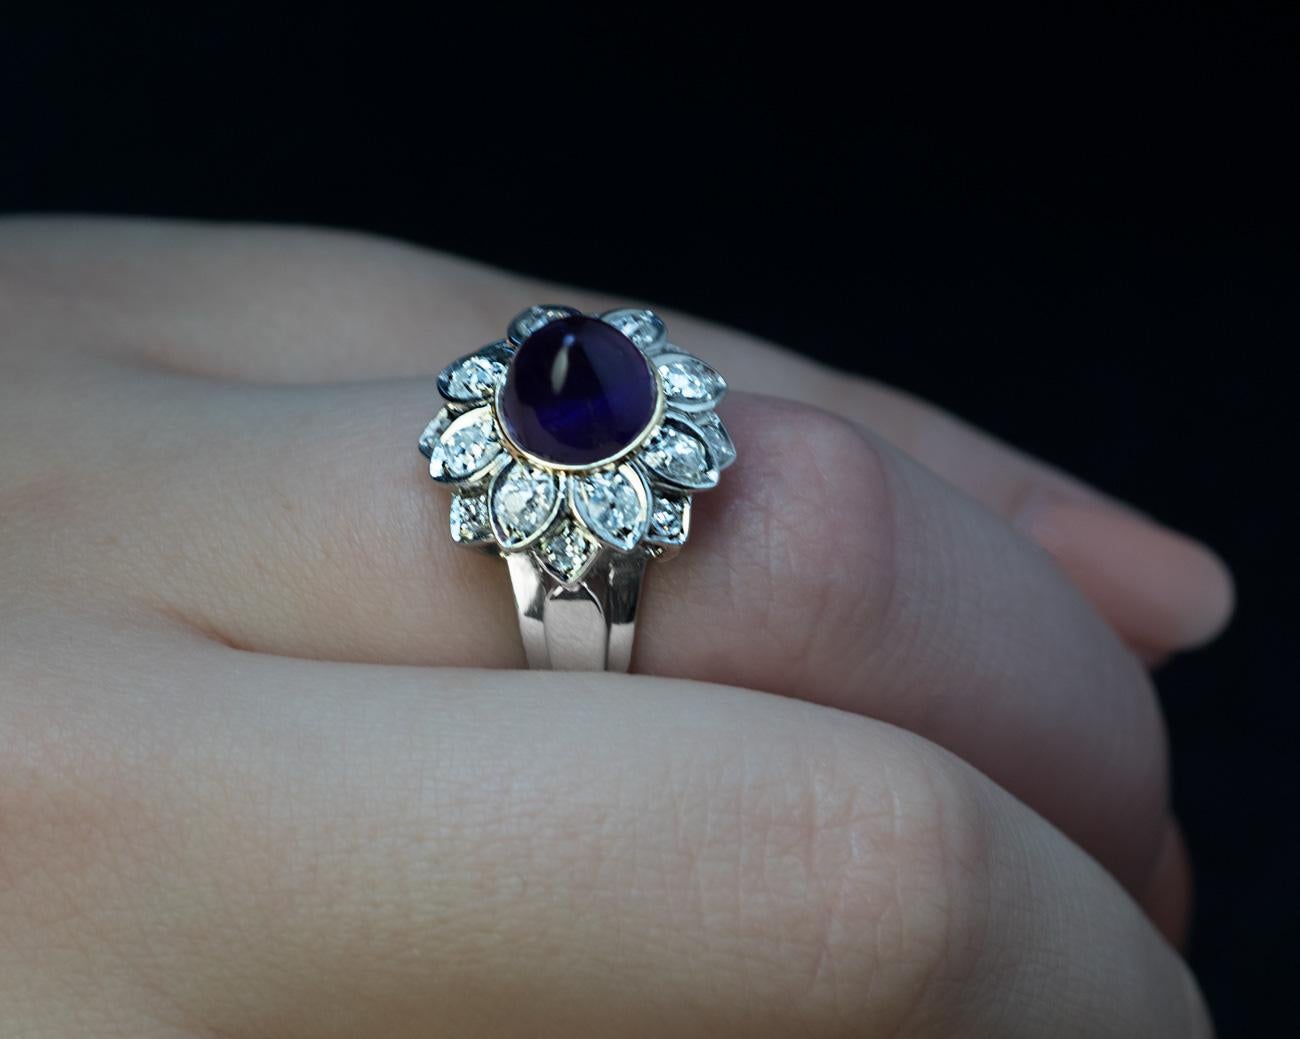 France, 1950s

A vintage platinum and gold ring is designed as a flower head with a cabochon amethyst center and diamond set petals. The cabochon cut amethyst of a dark purple color is set in a yellow gold bezel.

The amethyst measures 8 x 8 x 7.3